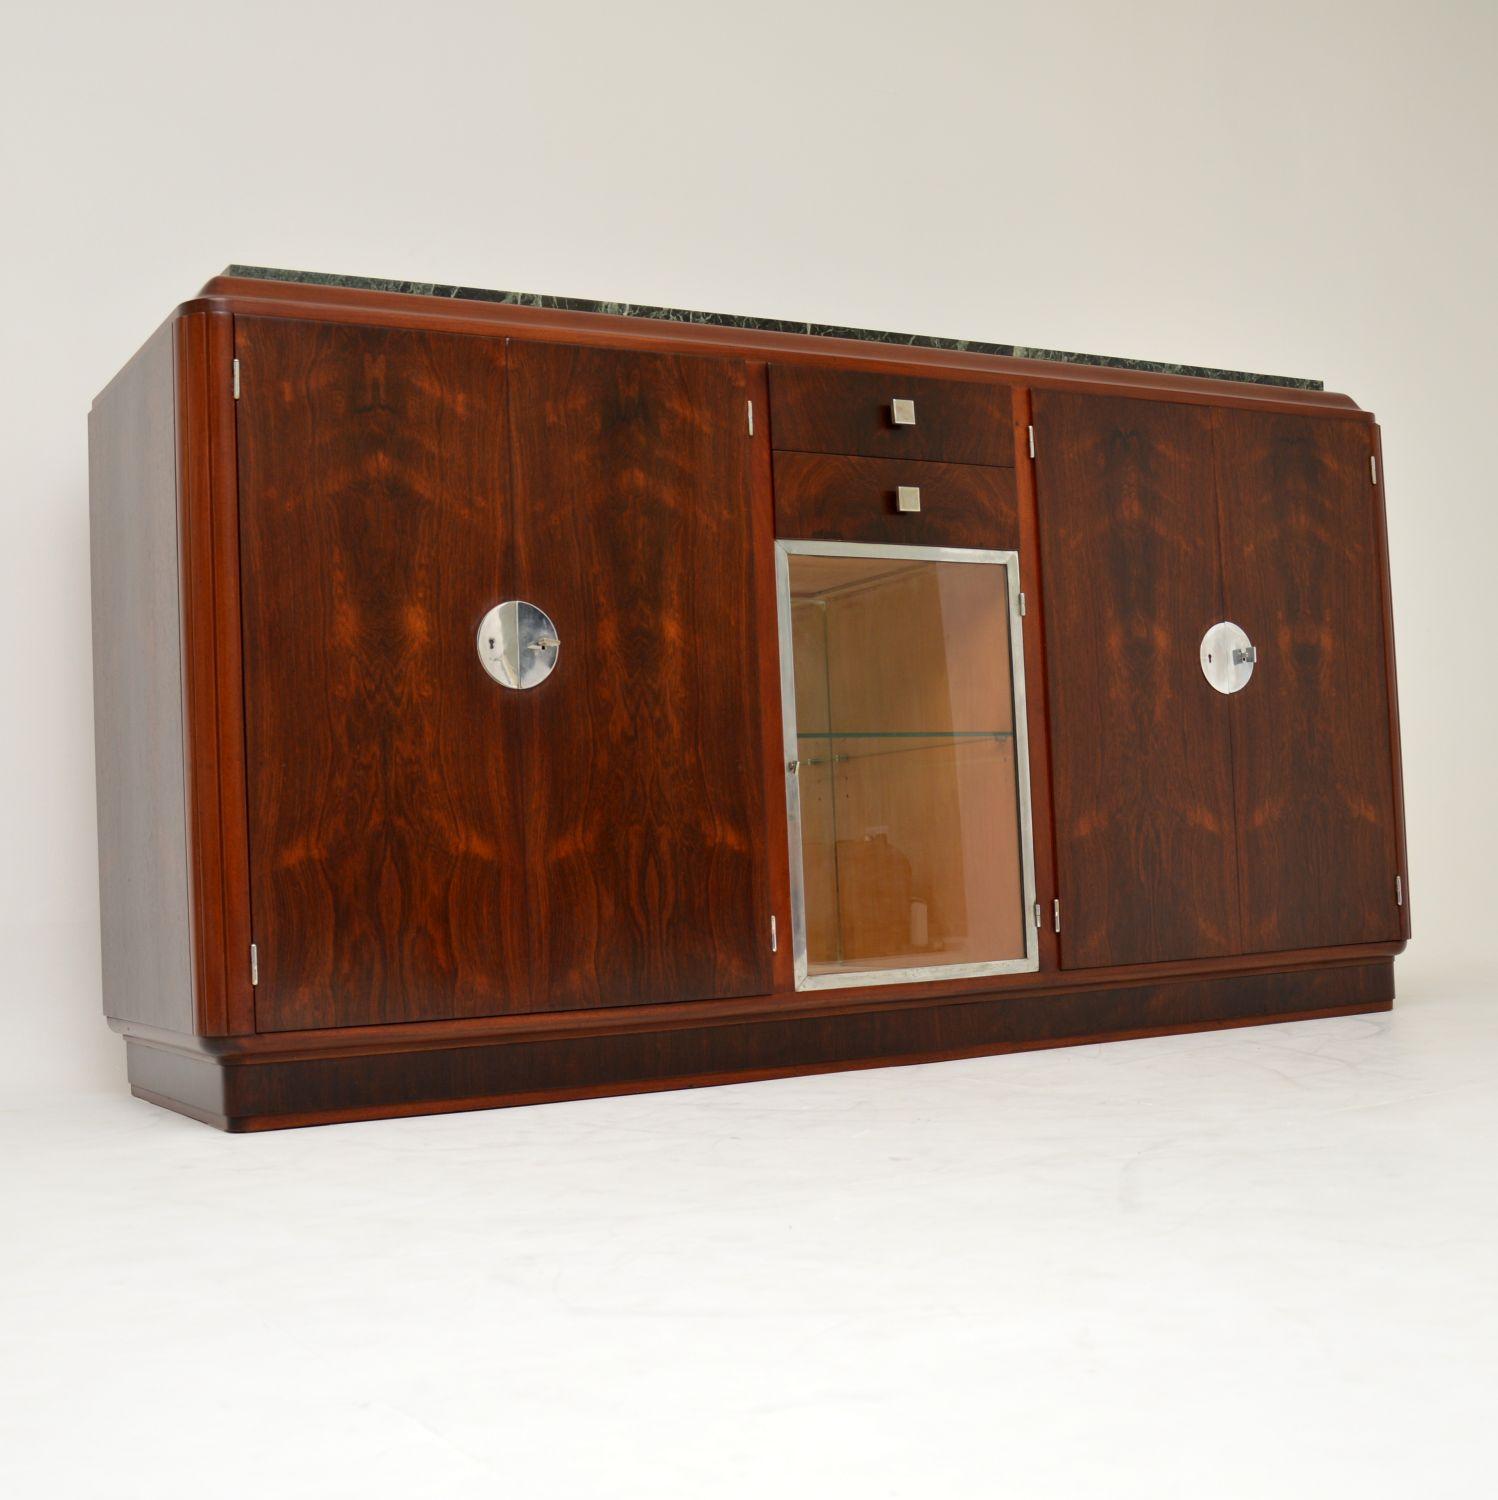 20th Century 1920s French Art Deco Wood and Marble Sideboard